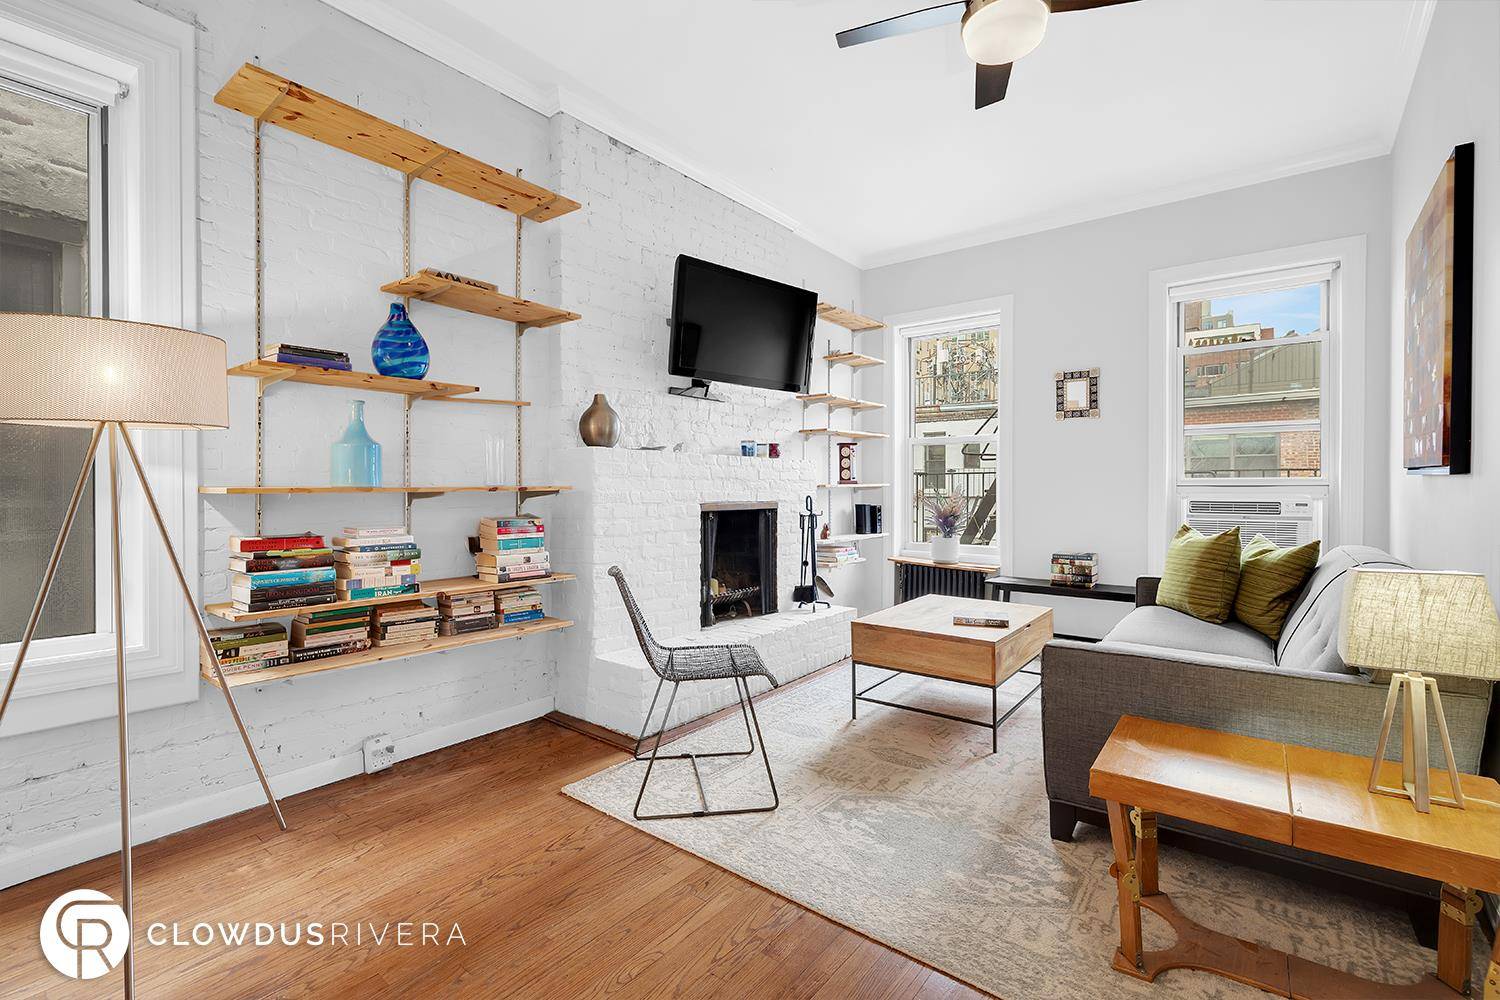 SERENE, TOP FLOOR ONE BEDROOM WITH HOME OFFICE DINING ROOM509 EAST 83RD STREET, APT 5RKindly note that all showings and open houses are by appointment only.